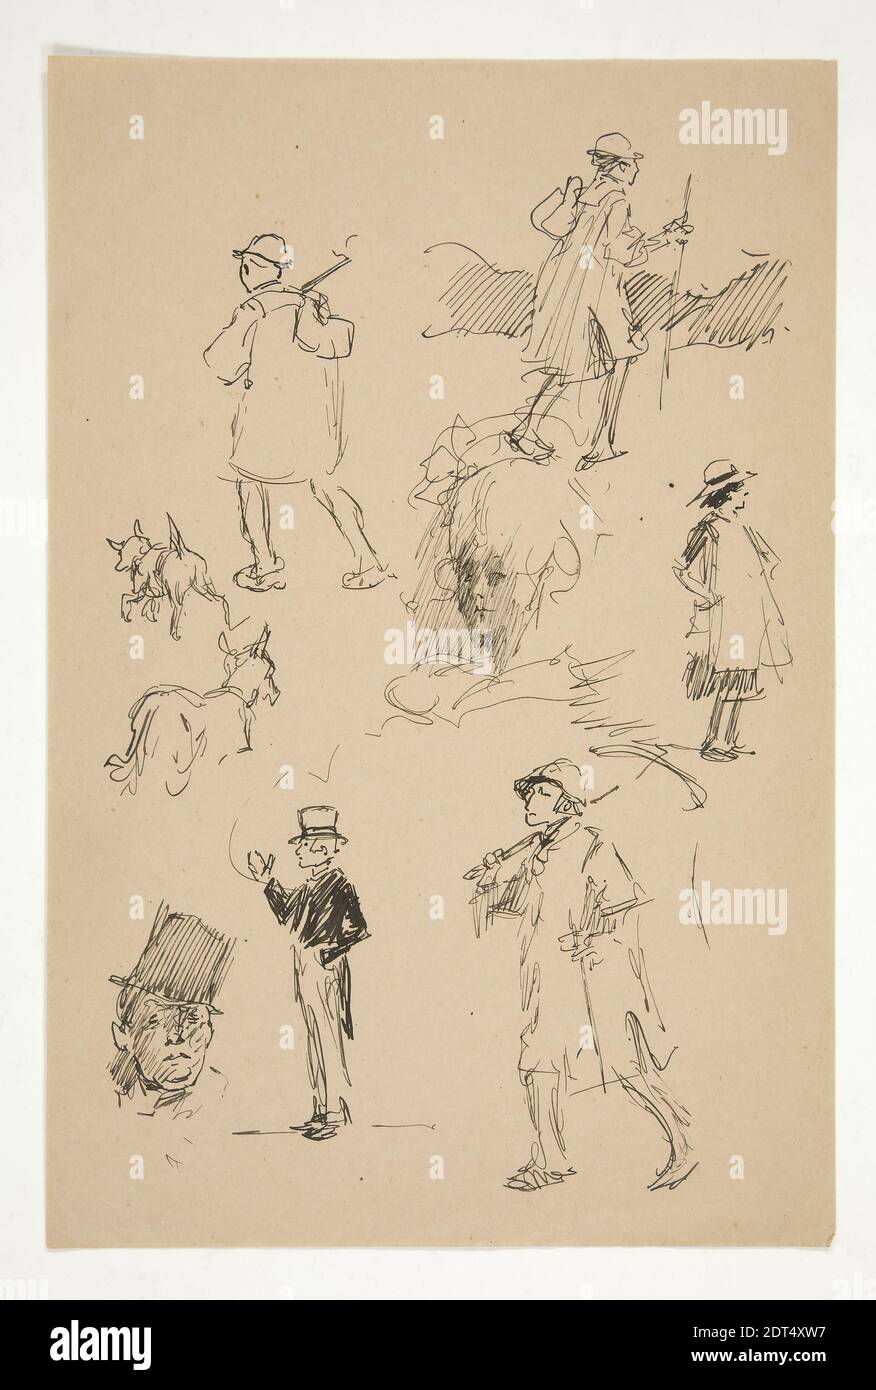 Artist: Edwin Austin Abbey, American, 1852–1911, M.A., 1897, Sheet of sketches of country figures, Pen and ink, Brown wove, 22.6 × 15 cm (8 7/8 × 5 7/8 in.), made in United States, American, 19th Century, Works on Paper - Drawings and Watercolours Foto Stock